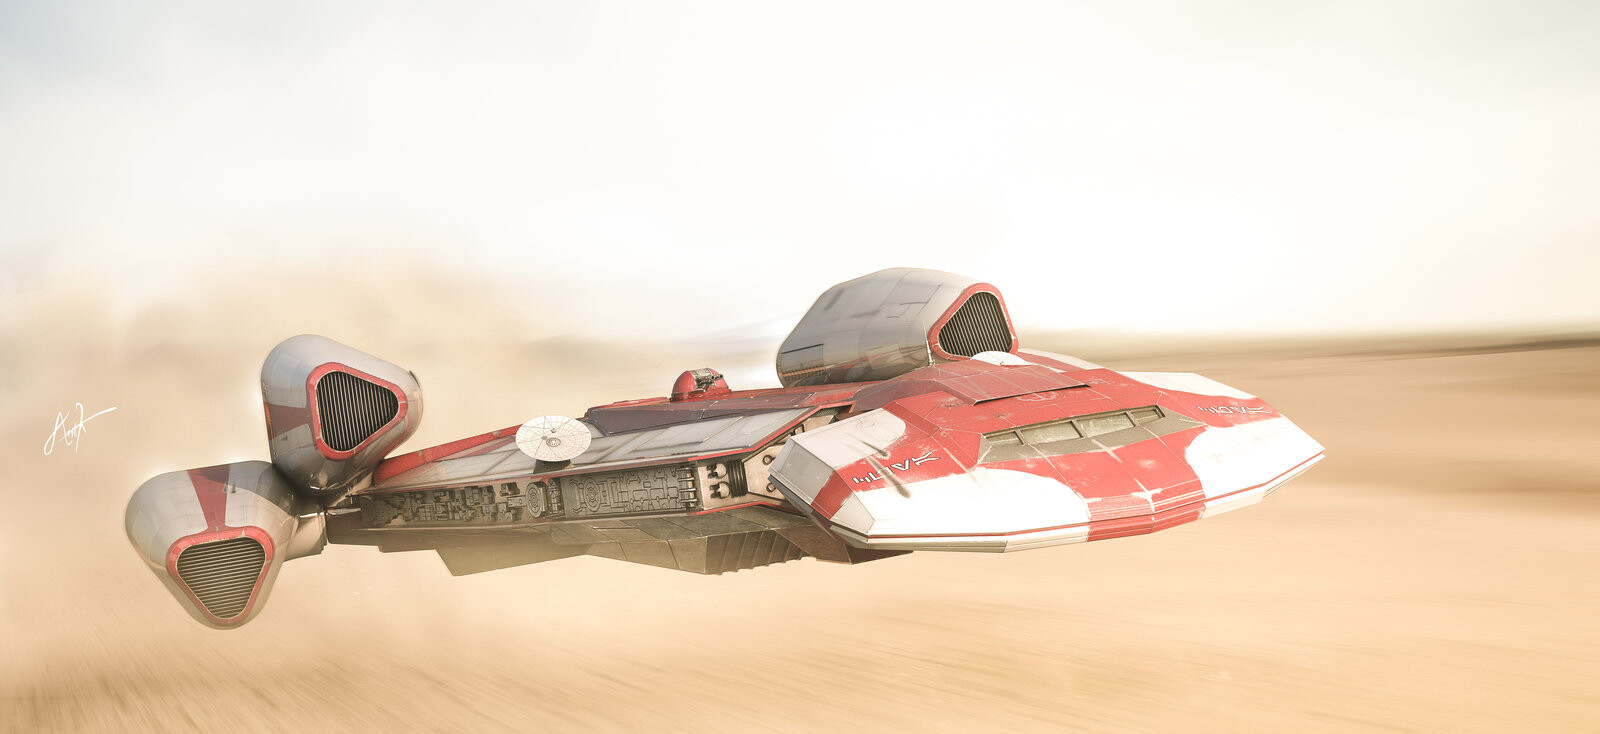 star_wars___going_low_and_fast_by_roen911-d5s9dh6.jpg